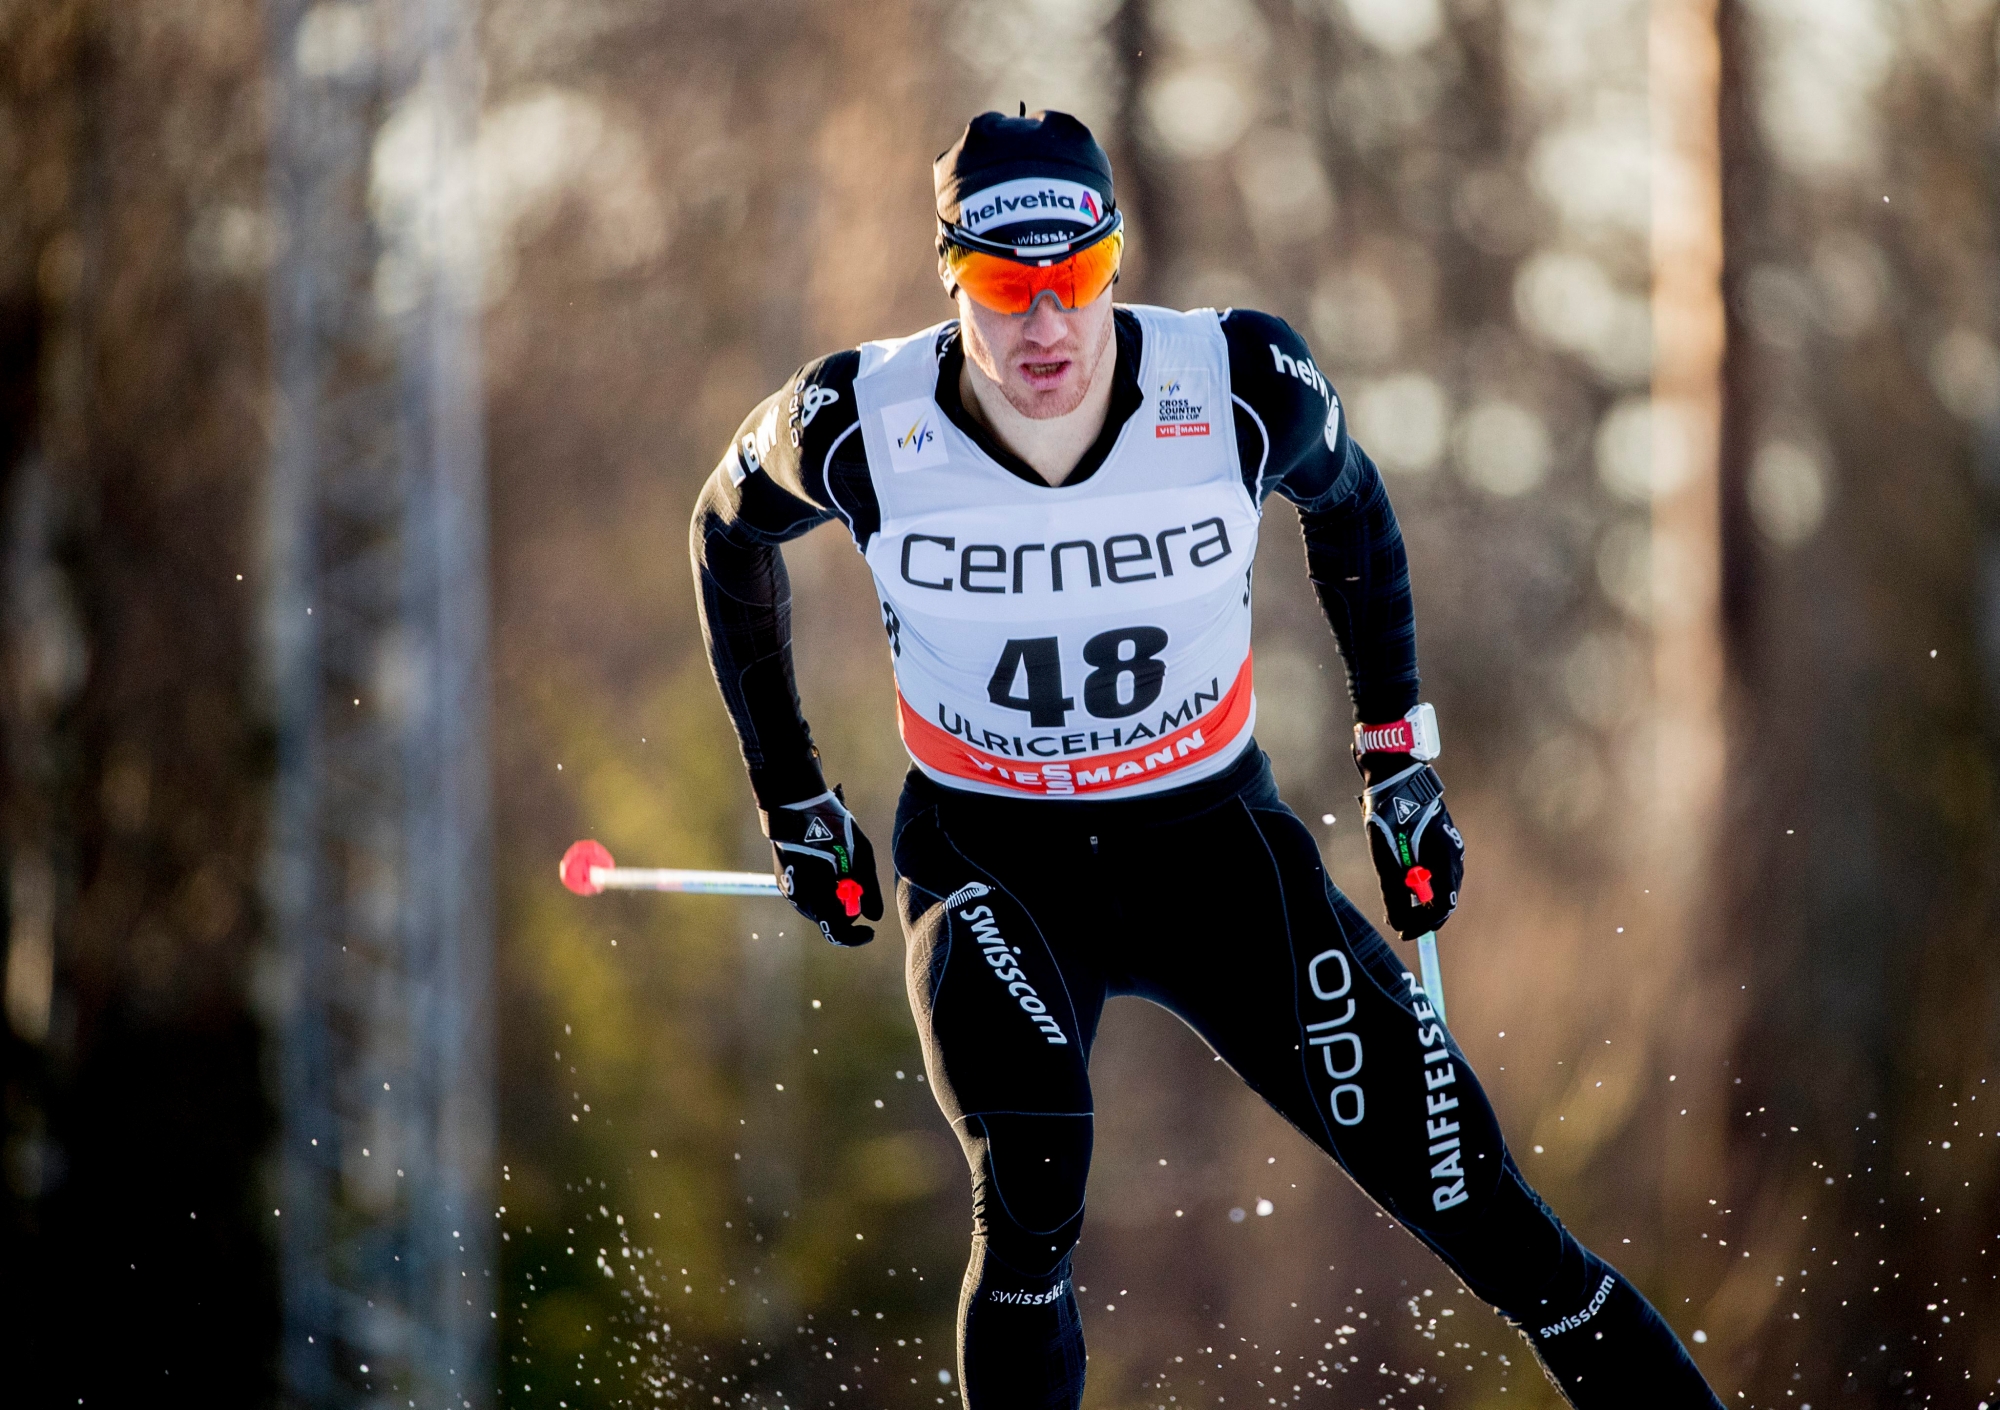 epa05738885 Dario Cologna of Switzerland in action  during the men's 15km free style competition at the FIS Cross Country skiing World Cup event in Ulricehamn, Sweden, 21 January 2017.  EPA/ADAM IHSE  SWEDEN OUT SWEDEN CROSS COUNTRY SKIING WORLD CUP